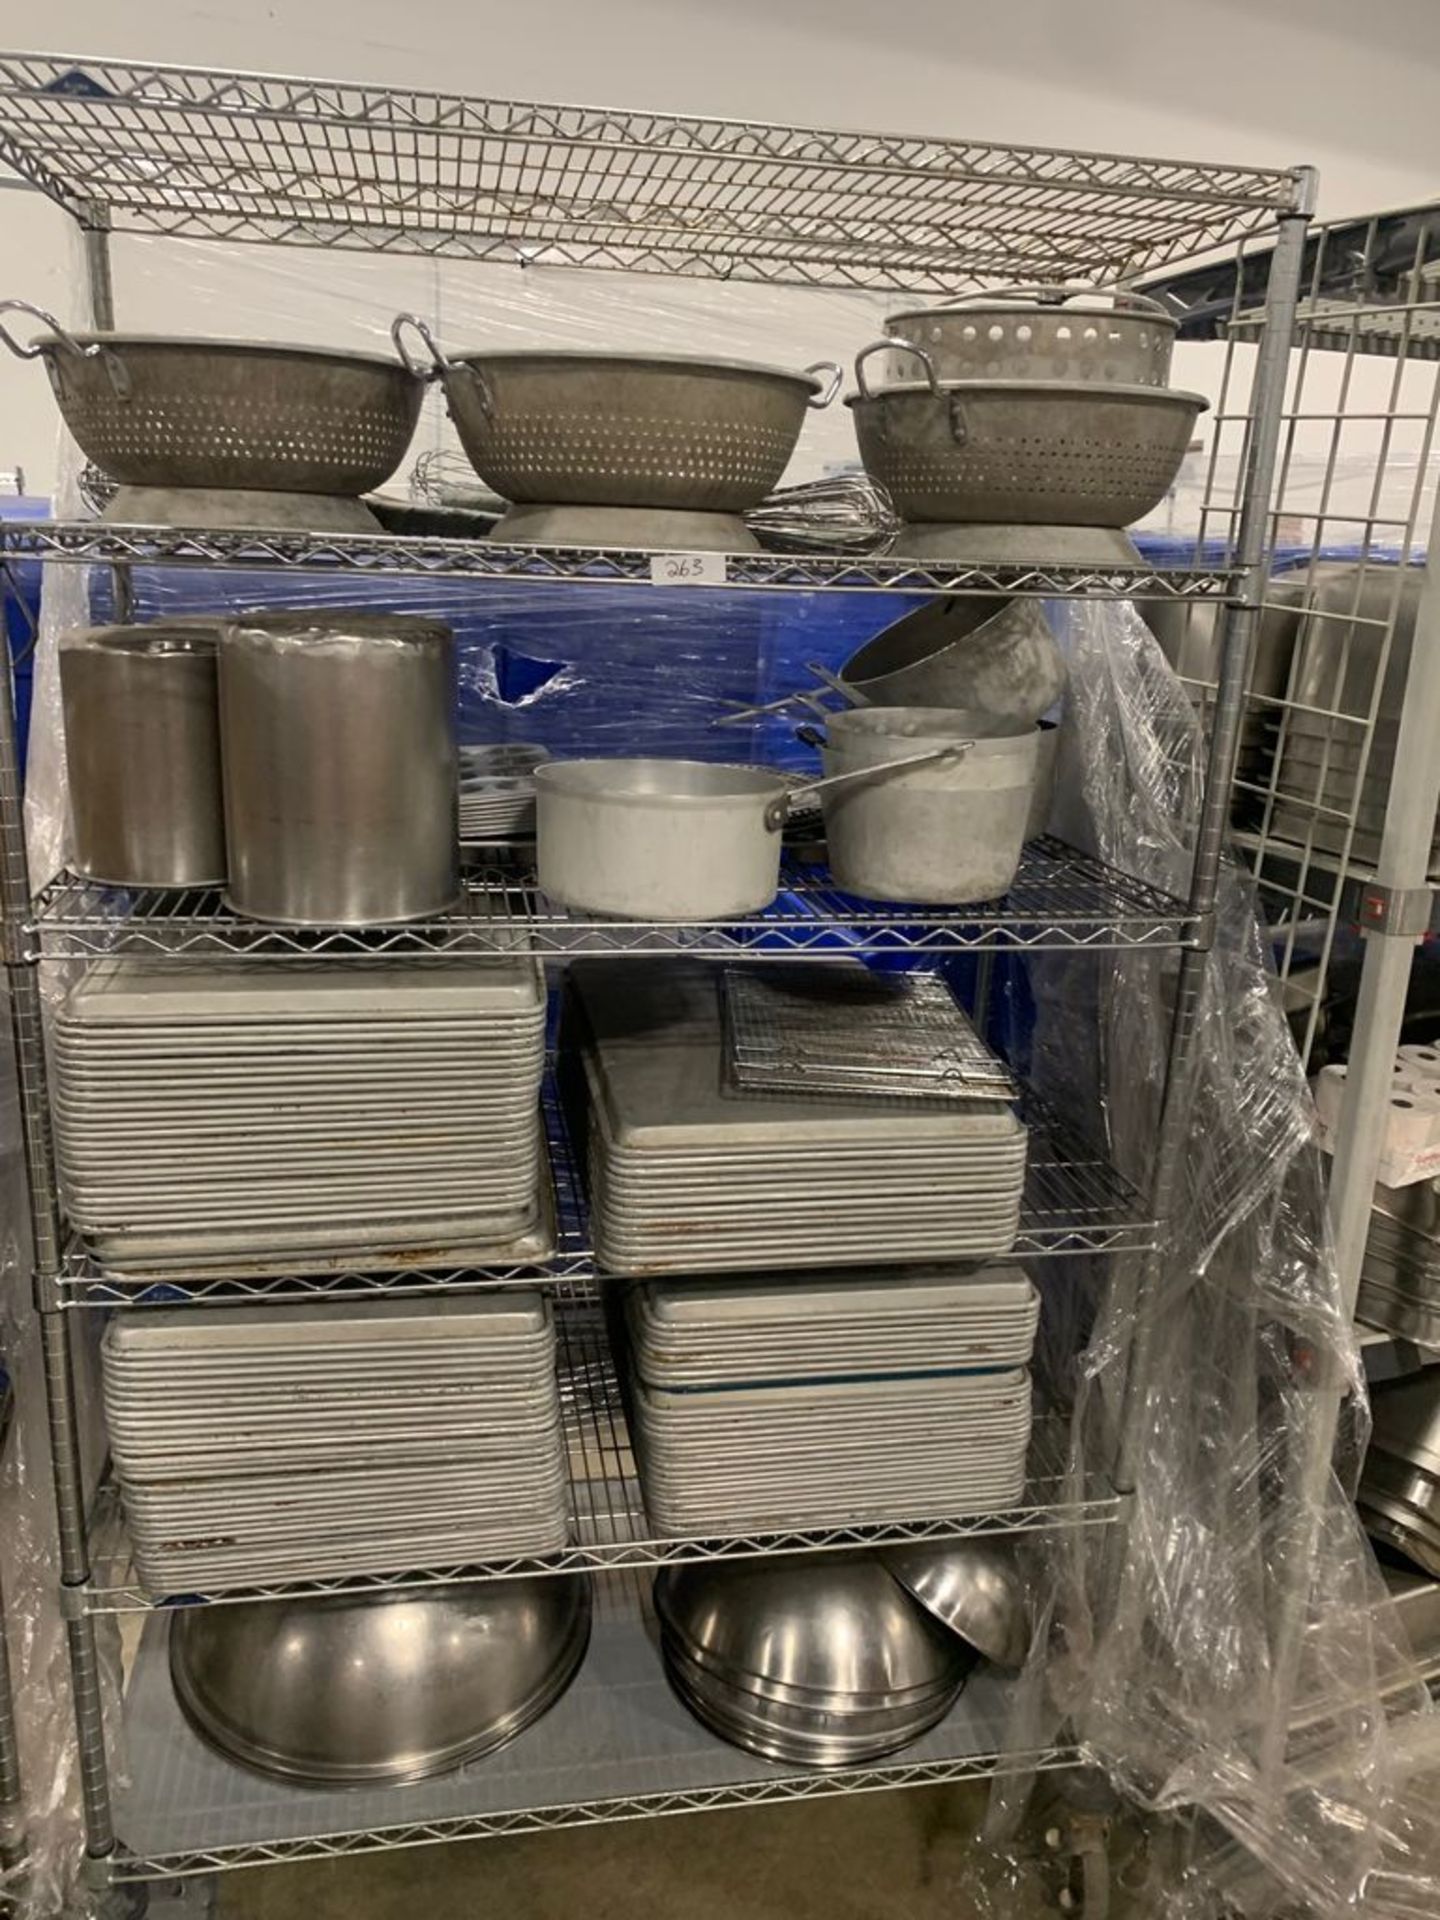 BAKING SUPPLIES, PANS, BOWLS, POTS , ROLLING CART INCLUDED